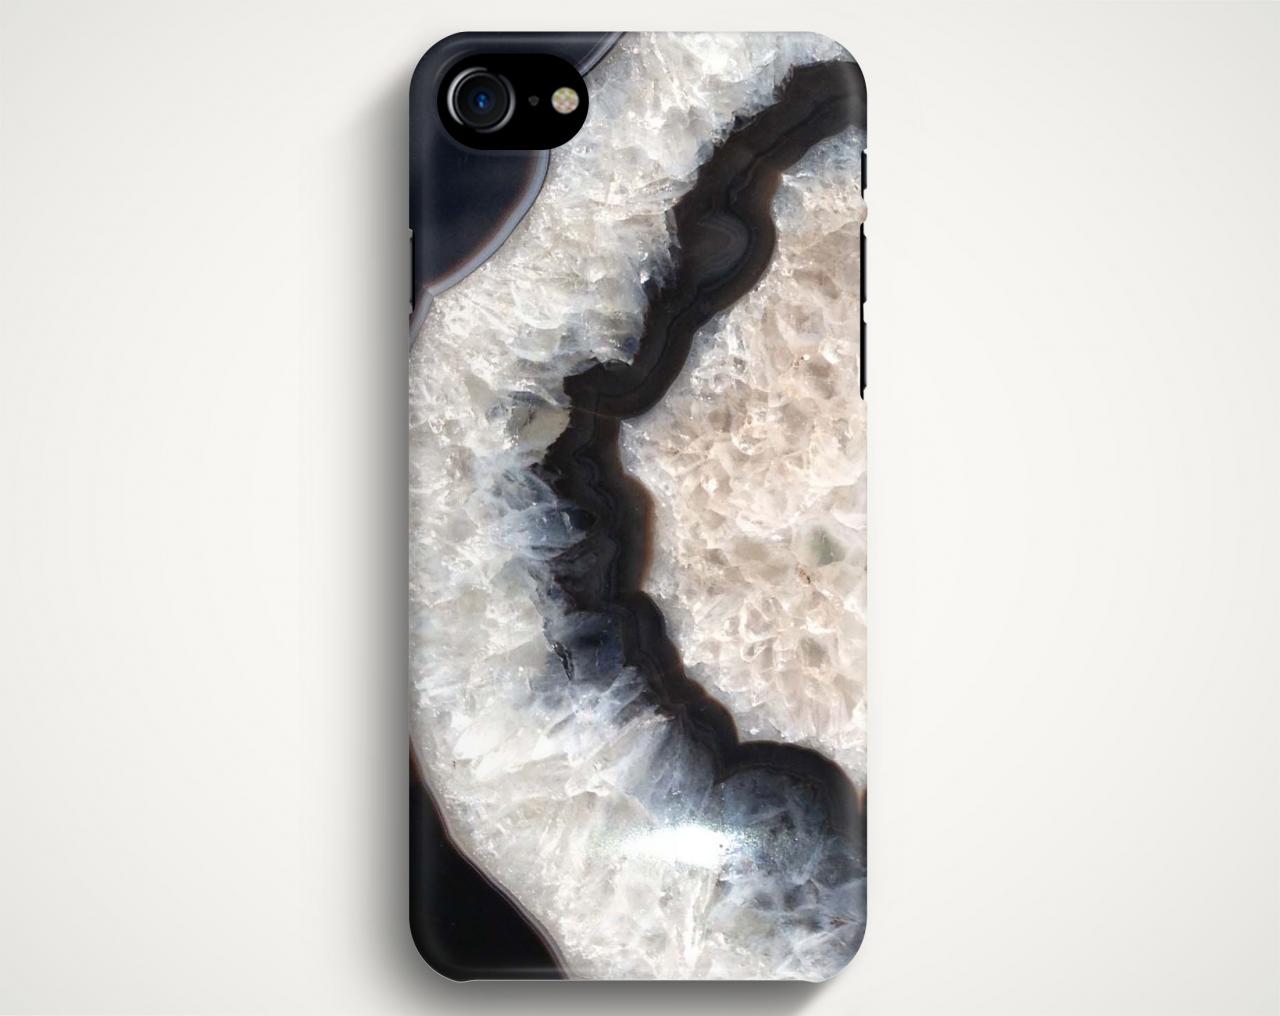 Black Agate Stone Texture Case For Iphone 7 Iphone 7 Plus Samsung Galaxy S8 Galaxy S7 Galaxy A3 Galaxy A5 Galaxy A7 Lg G6 Lg G5 Htc 10